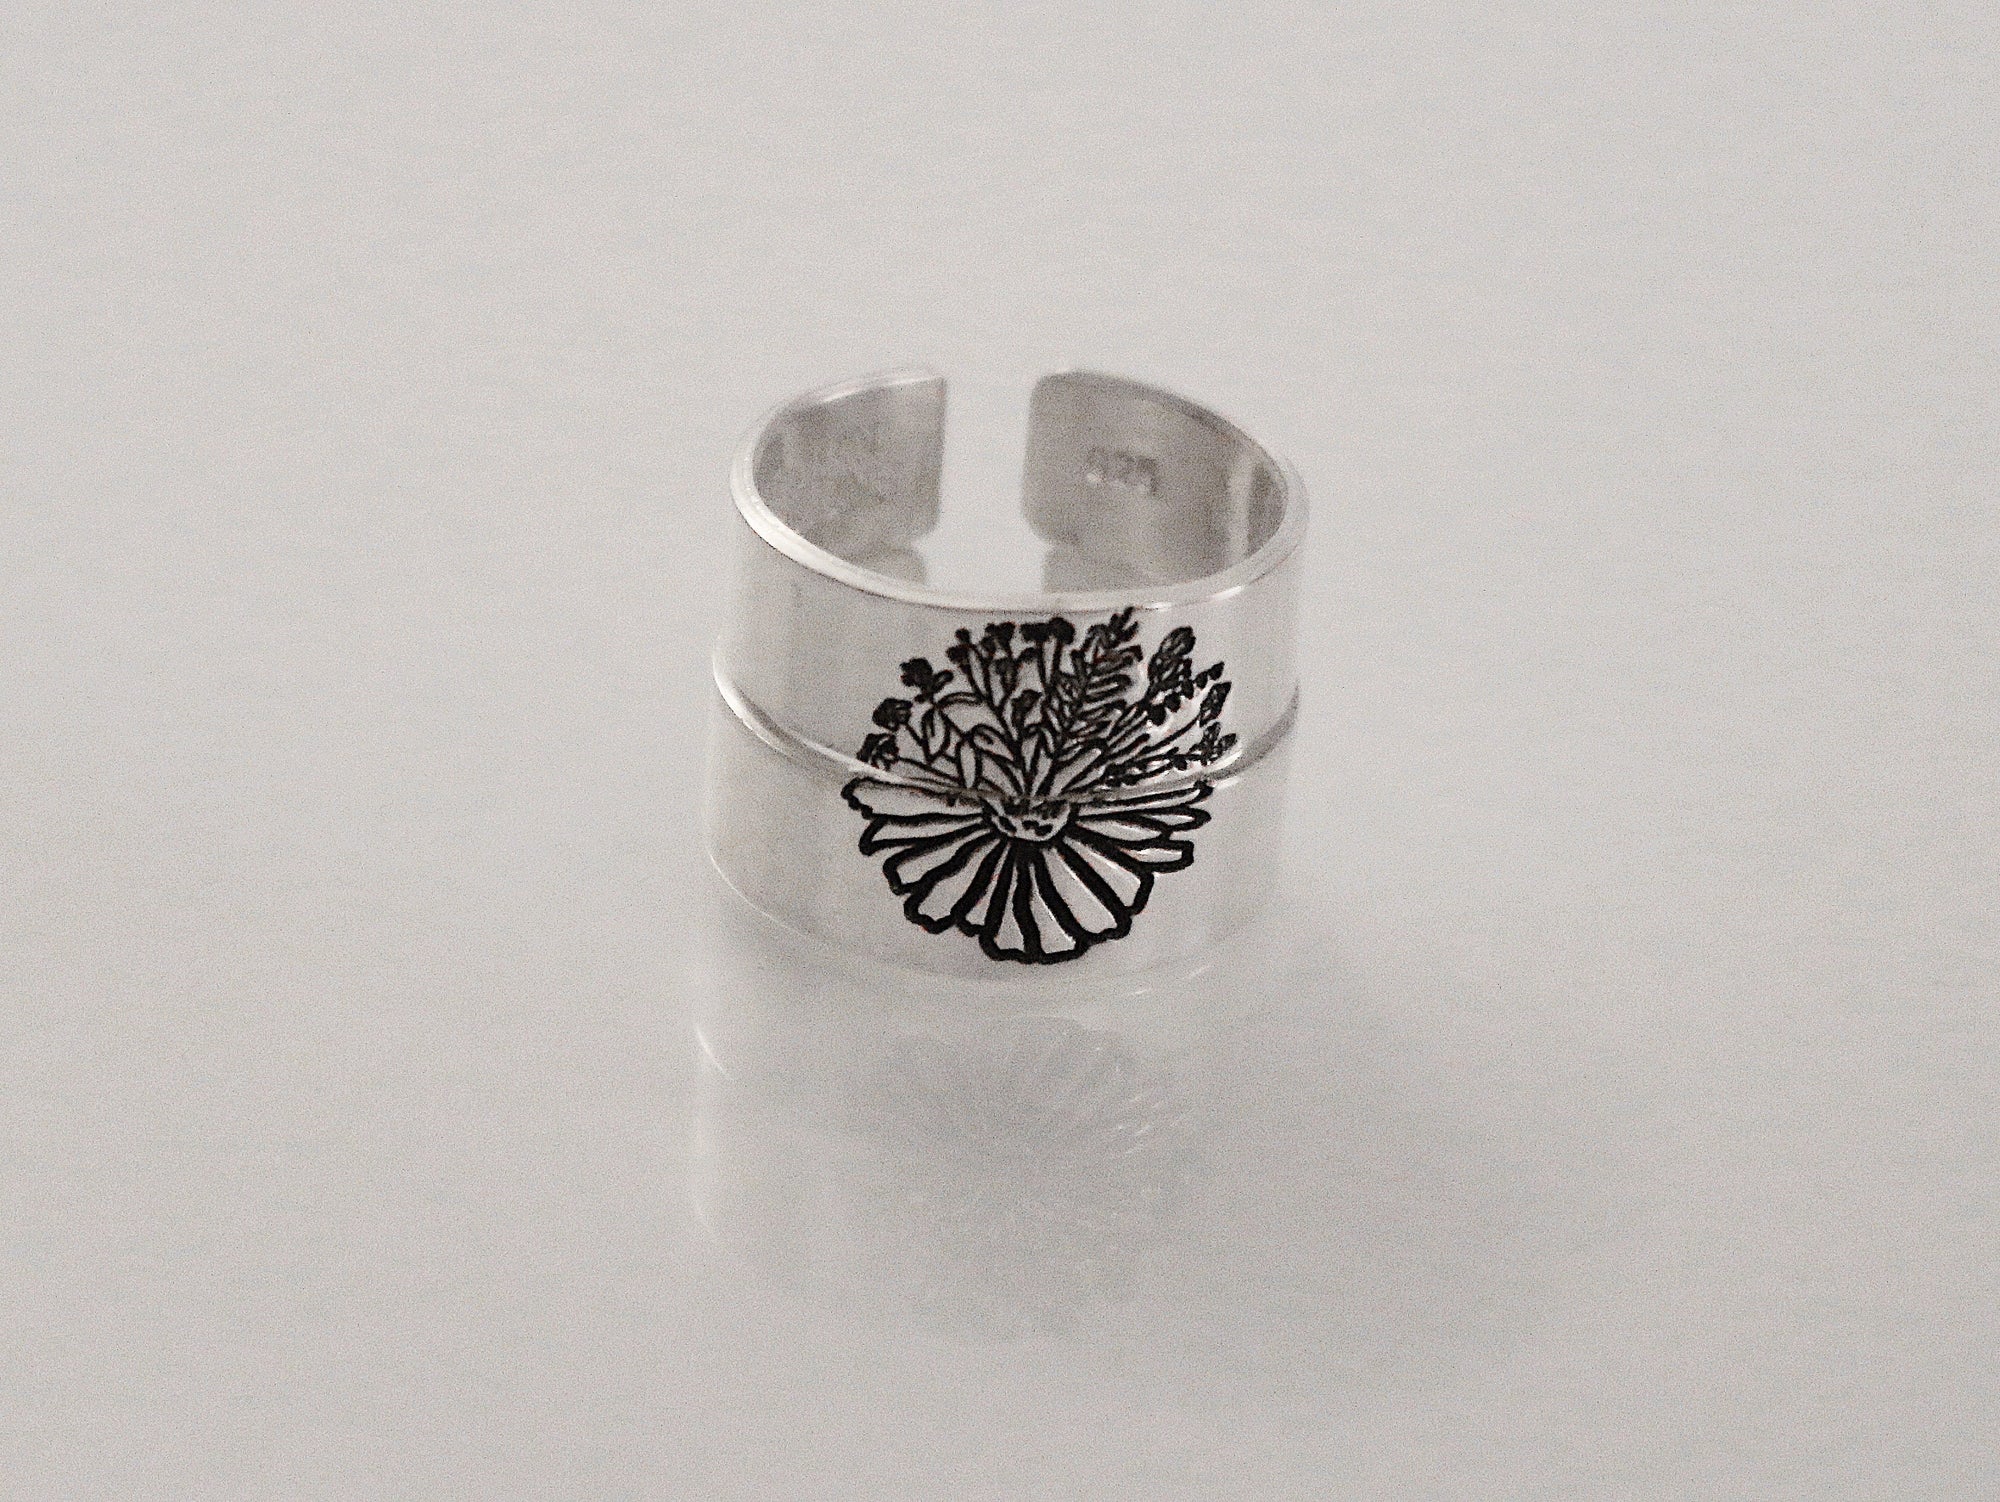 Friendship Rings | Matching 2 Ring Floral Matching Ring Set | Best Friend Gift | Promise Ring | Couples Rings | Anniversary Ring | Daisy